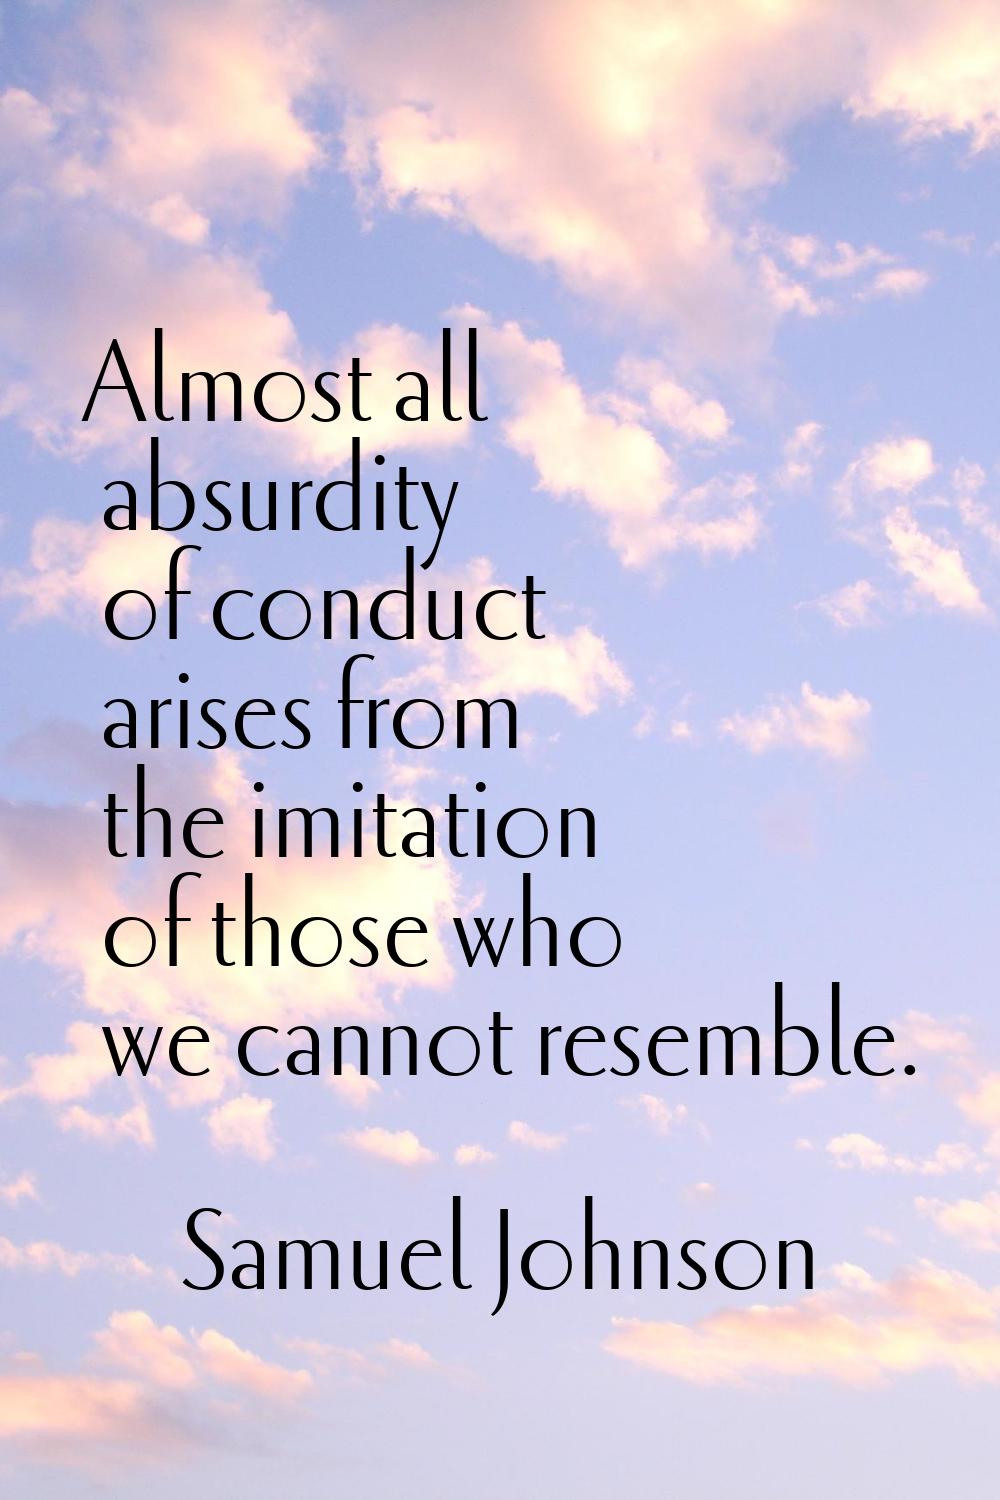 Almost all absurdity of conduct arises from the imitation of those who we cannot resemble.